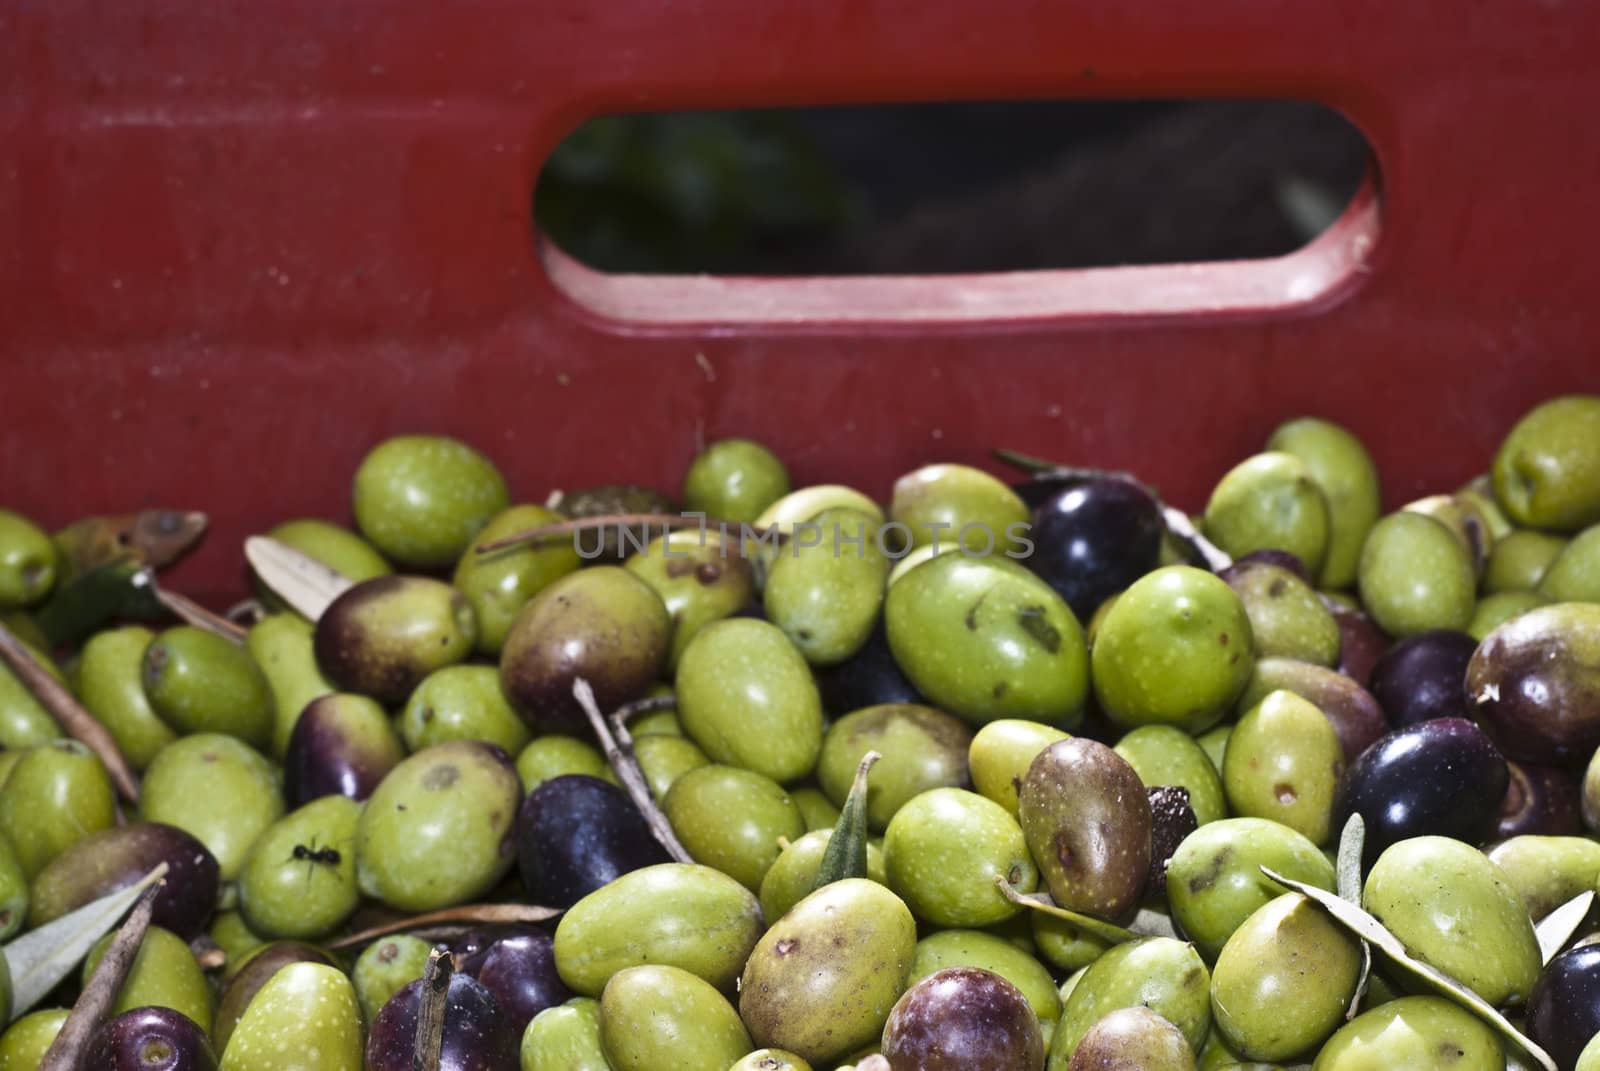 Detail of sicilian olives in the box.